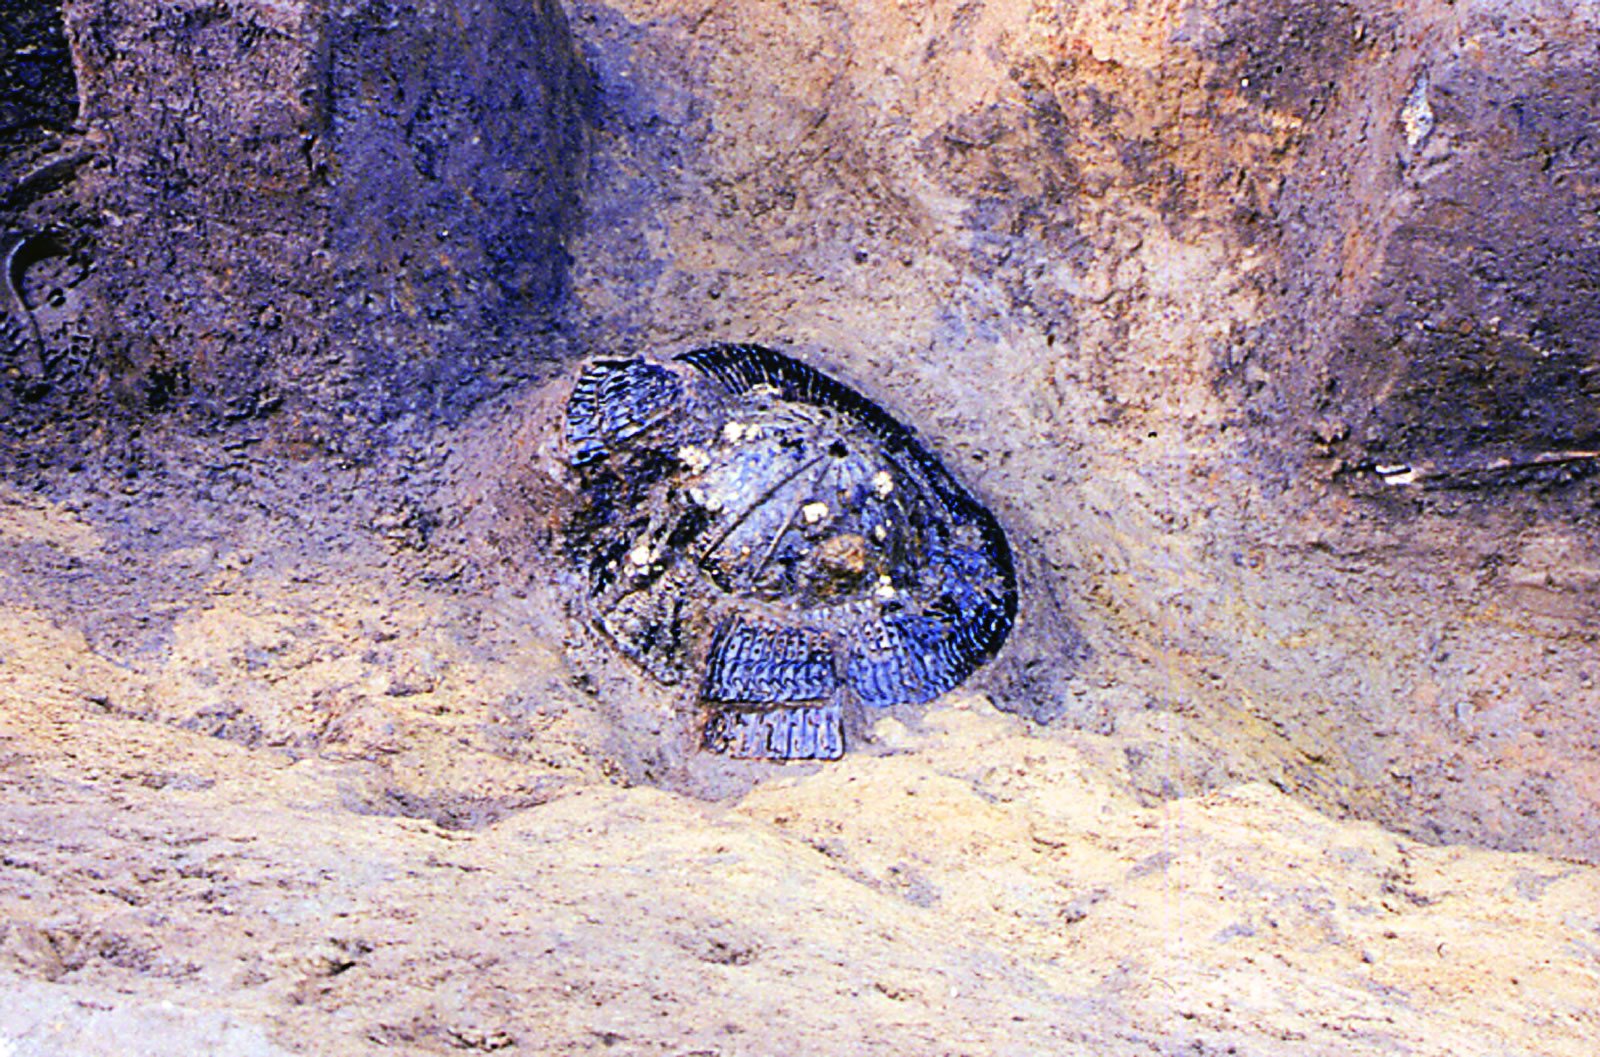 Kabuto helmet at the time of excavation